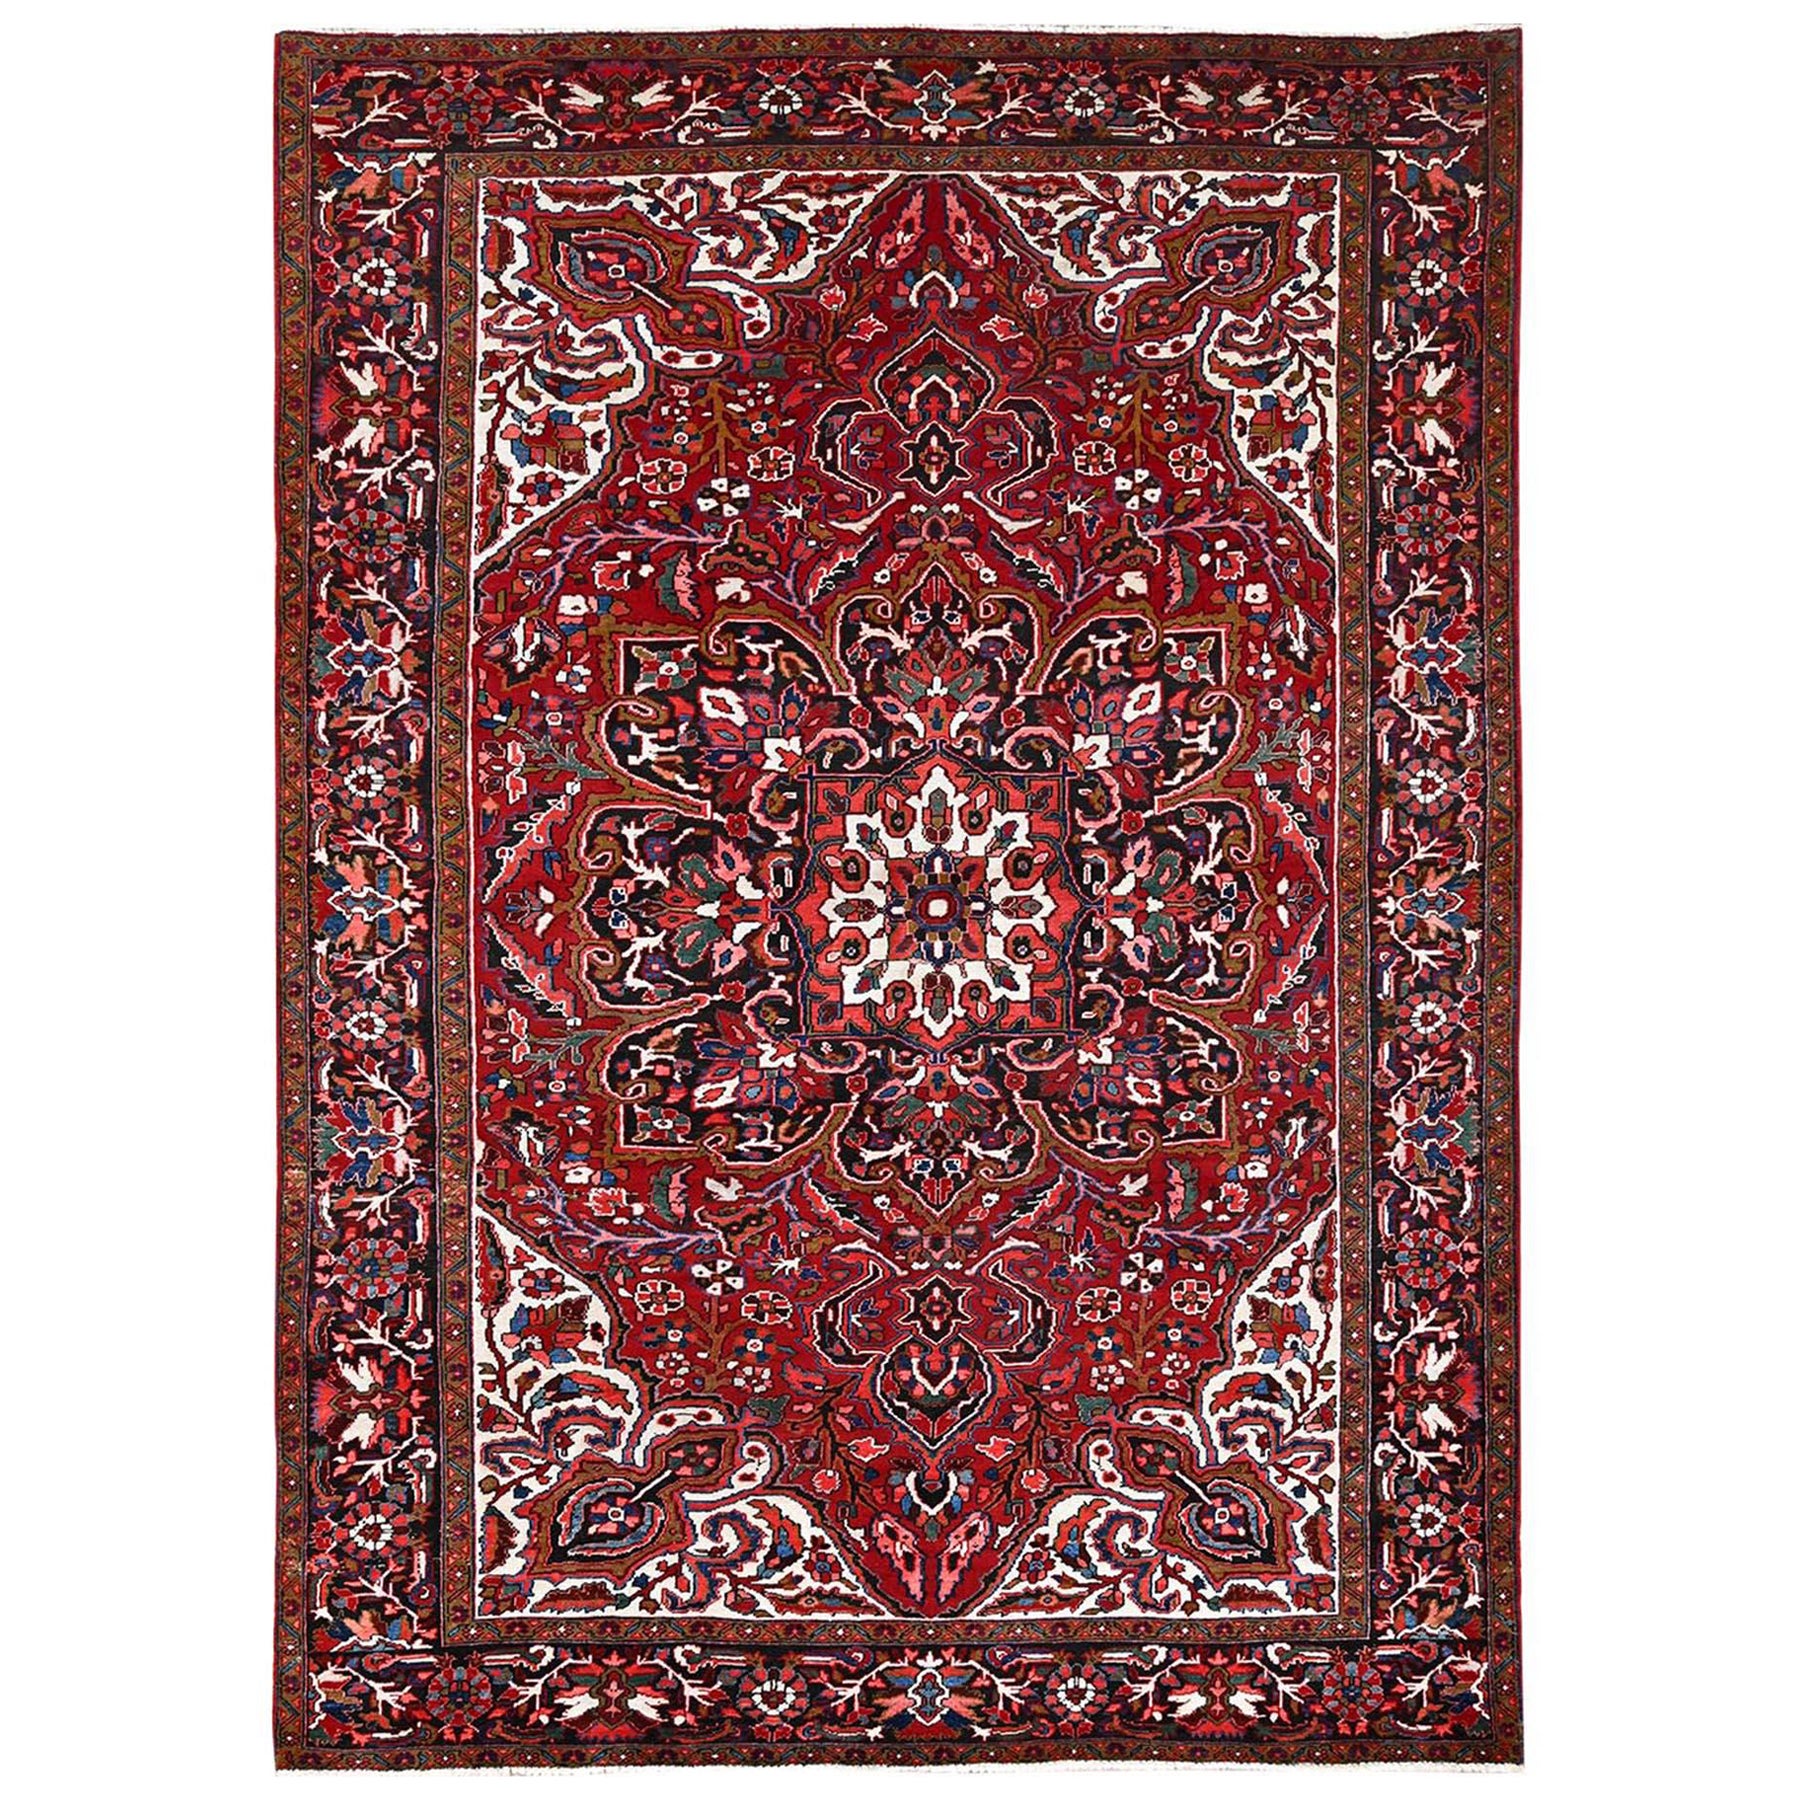 Red Rustic Feel Evenly Worn Pure Wool Hand Knotted Vintage Persian Heriz Rug